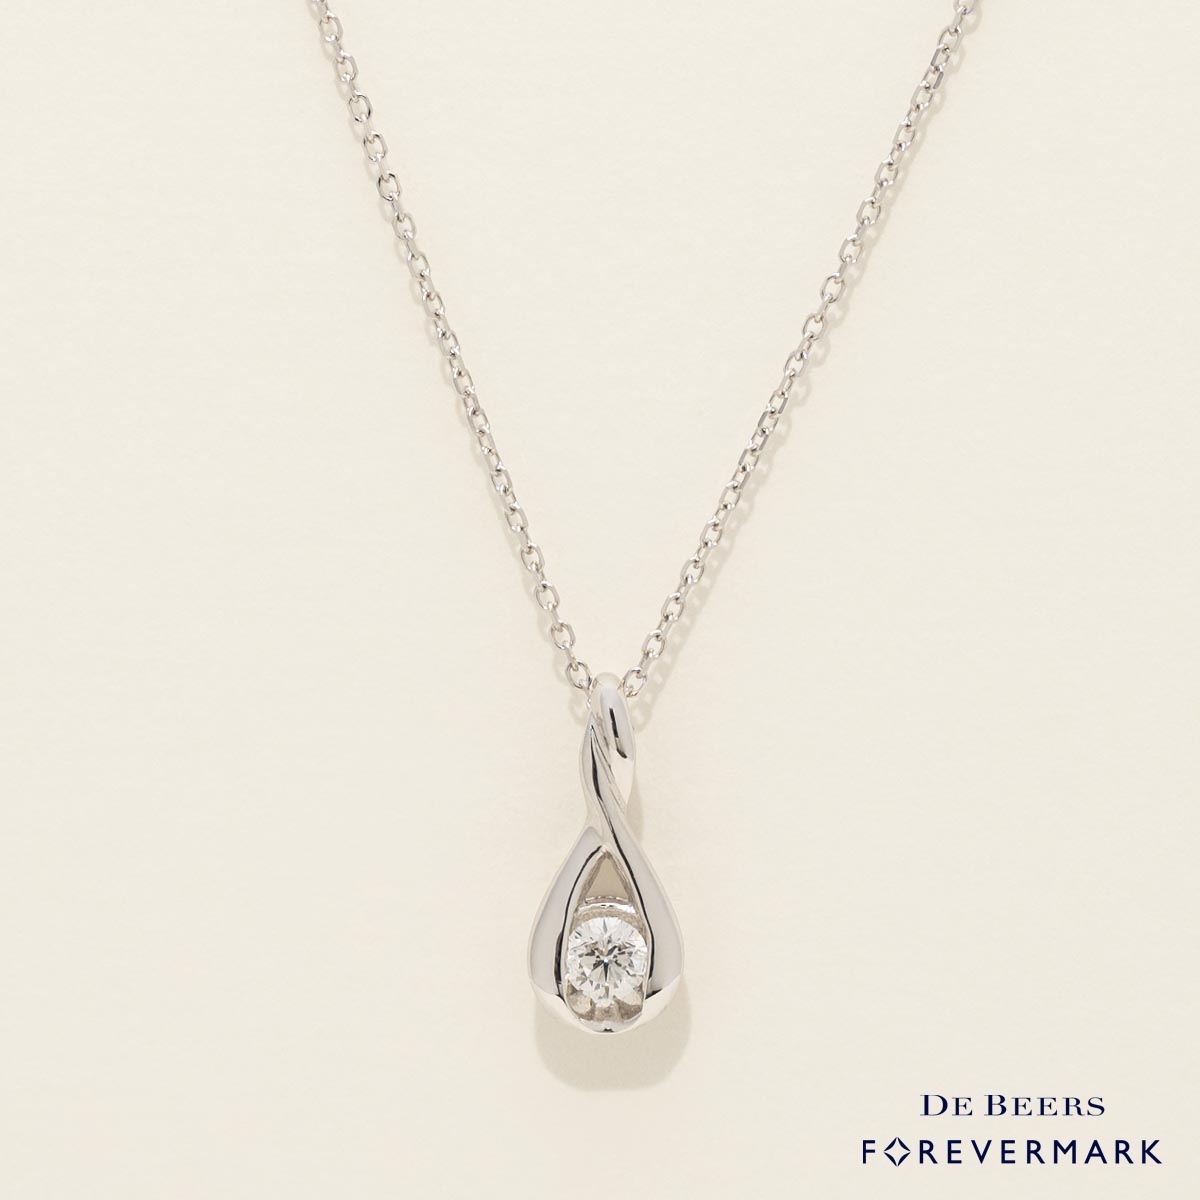 De Beers Forevermark Diamond Necklace in 18kt White Gold (1/7ct)